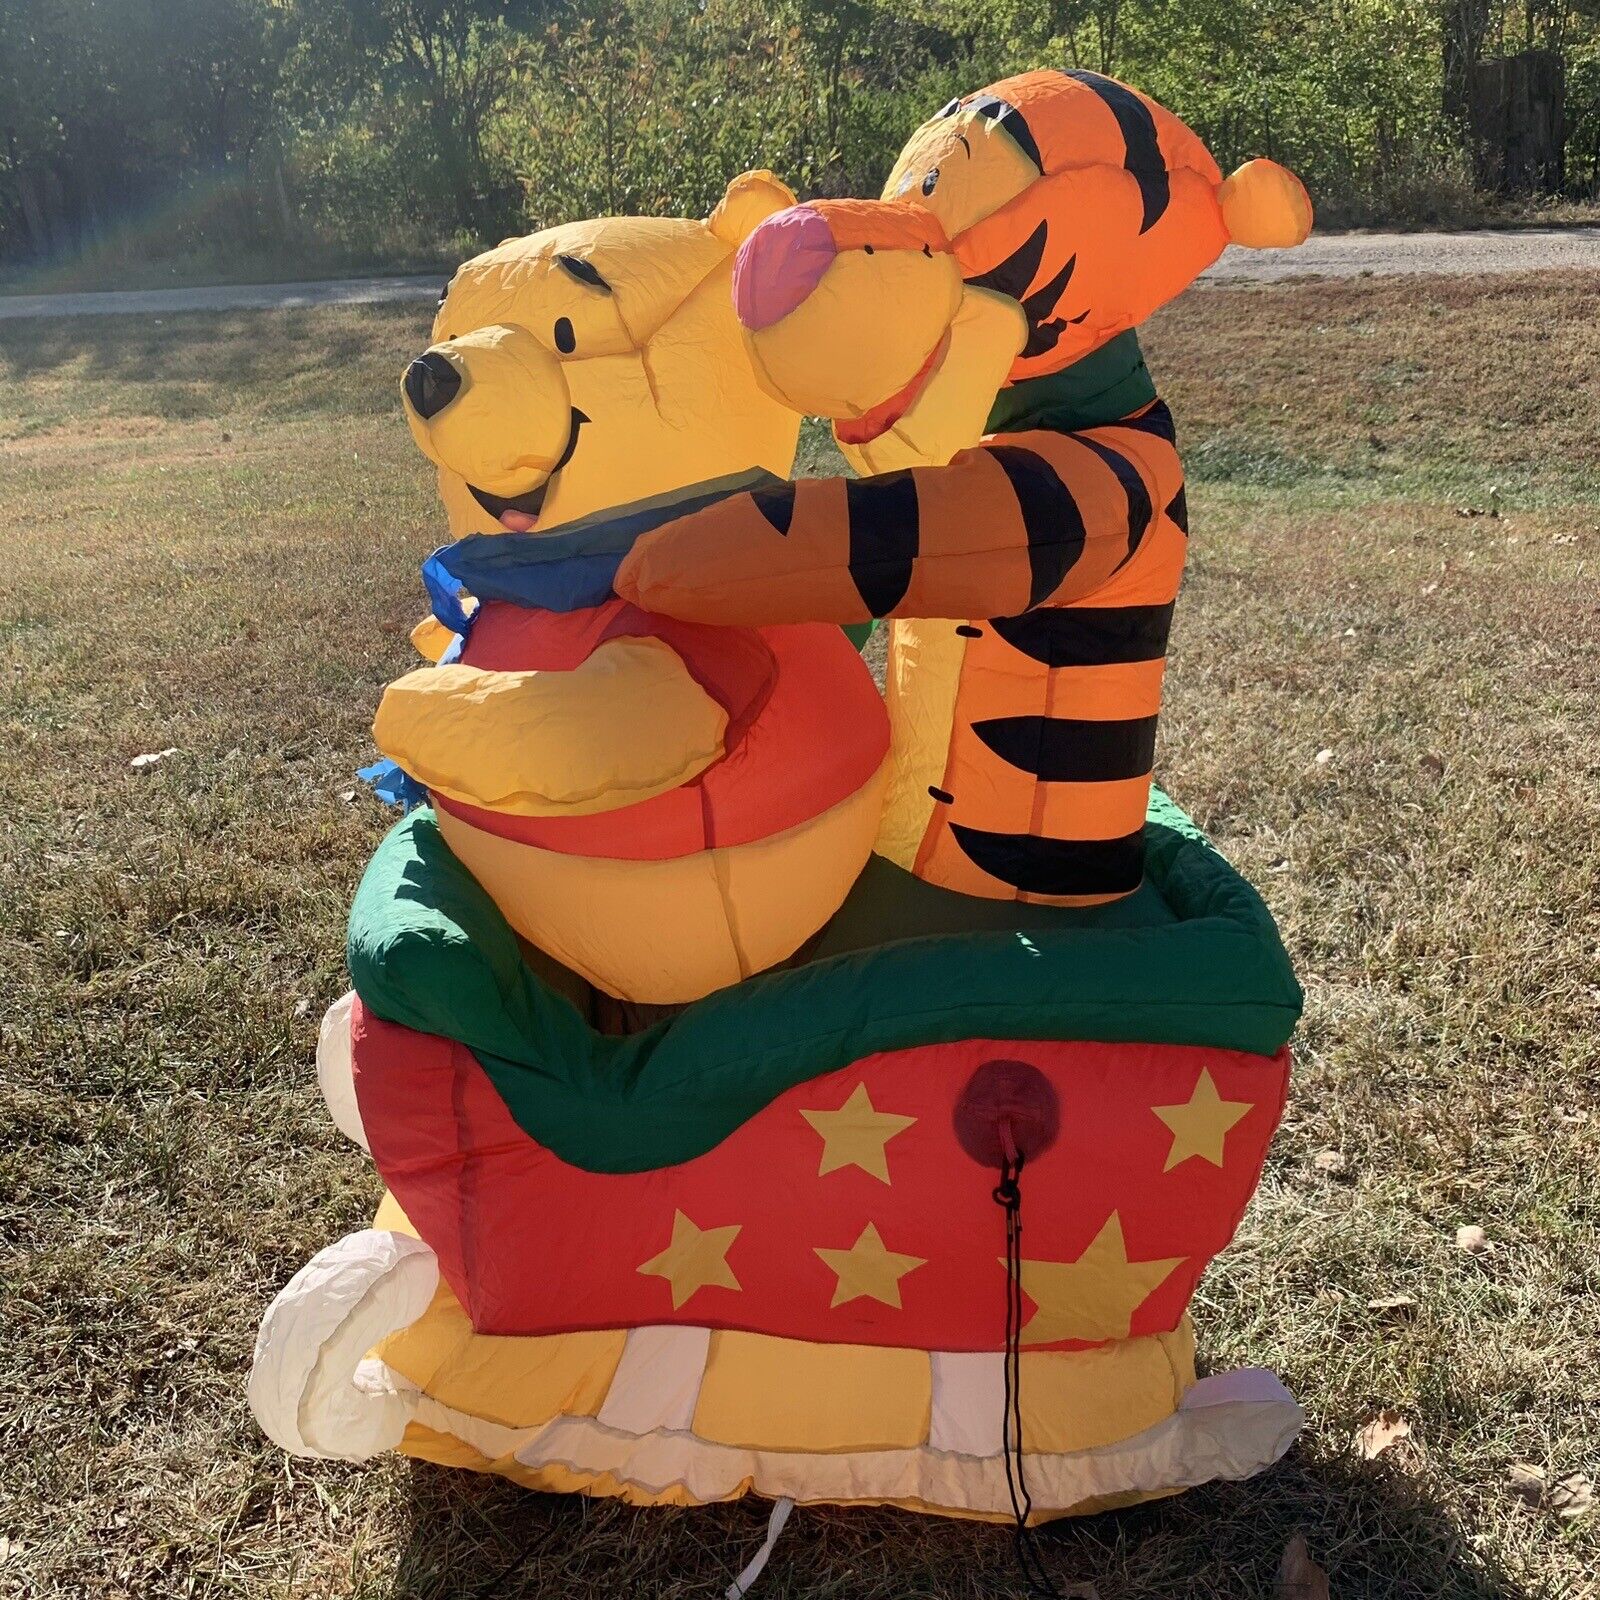 RARE 2007 Gemmy 3ft Winnie the Pooh & Tigger Riding Sleigh Christmas Inflatable